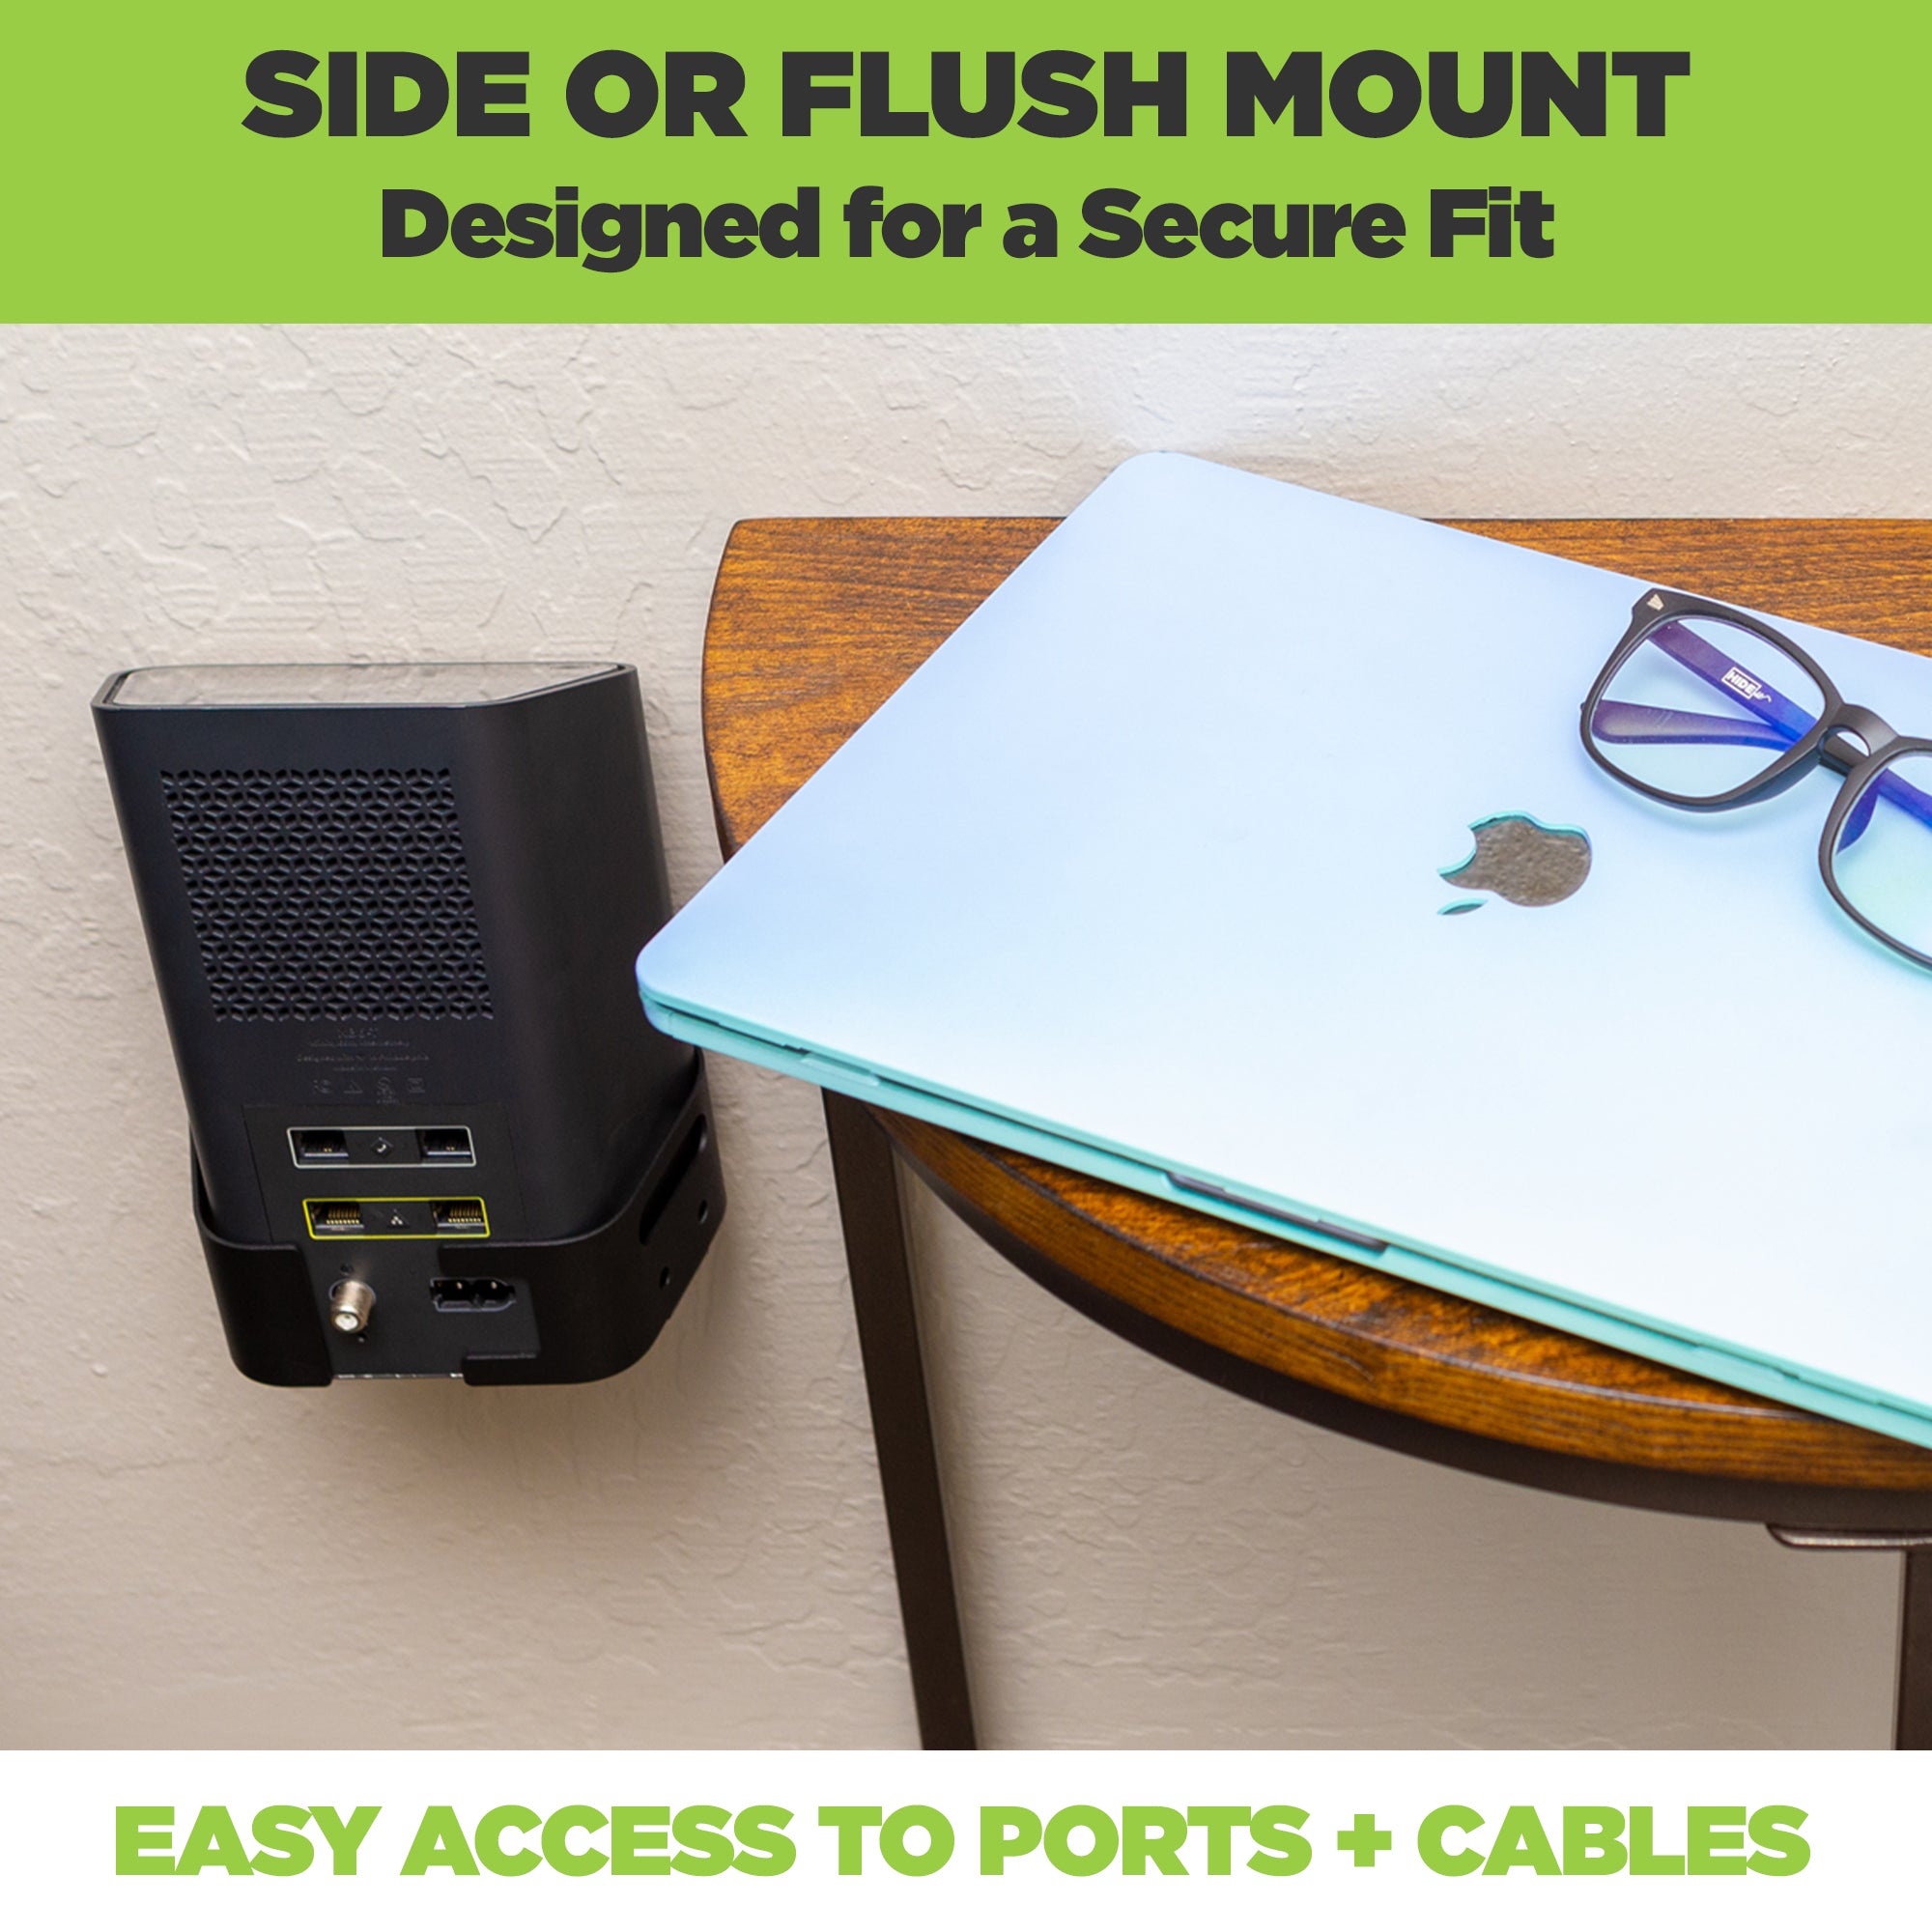 With the HIDEit xFi Gateway Mount you can mount your Xfinity router on the side or front of the device. Mount behind the TV for a sleek media setup.